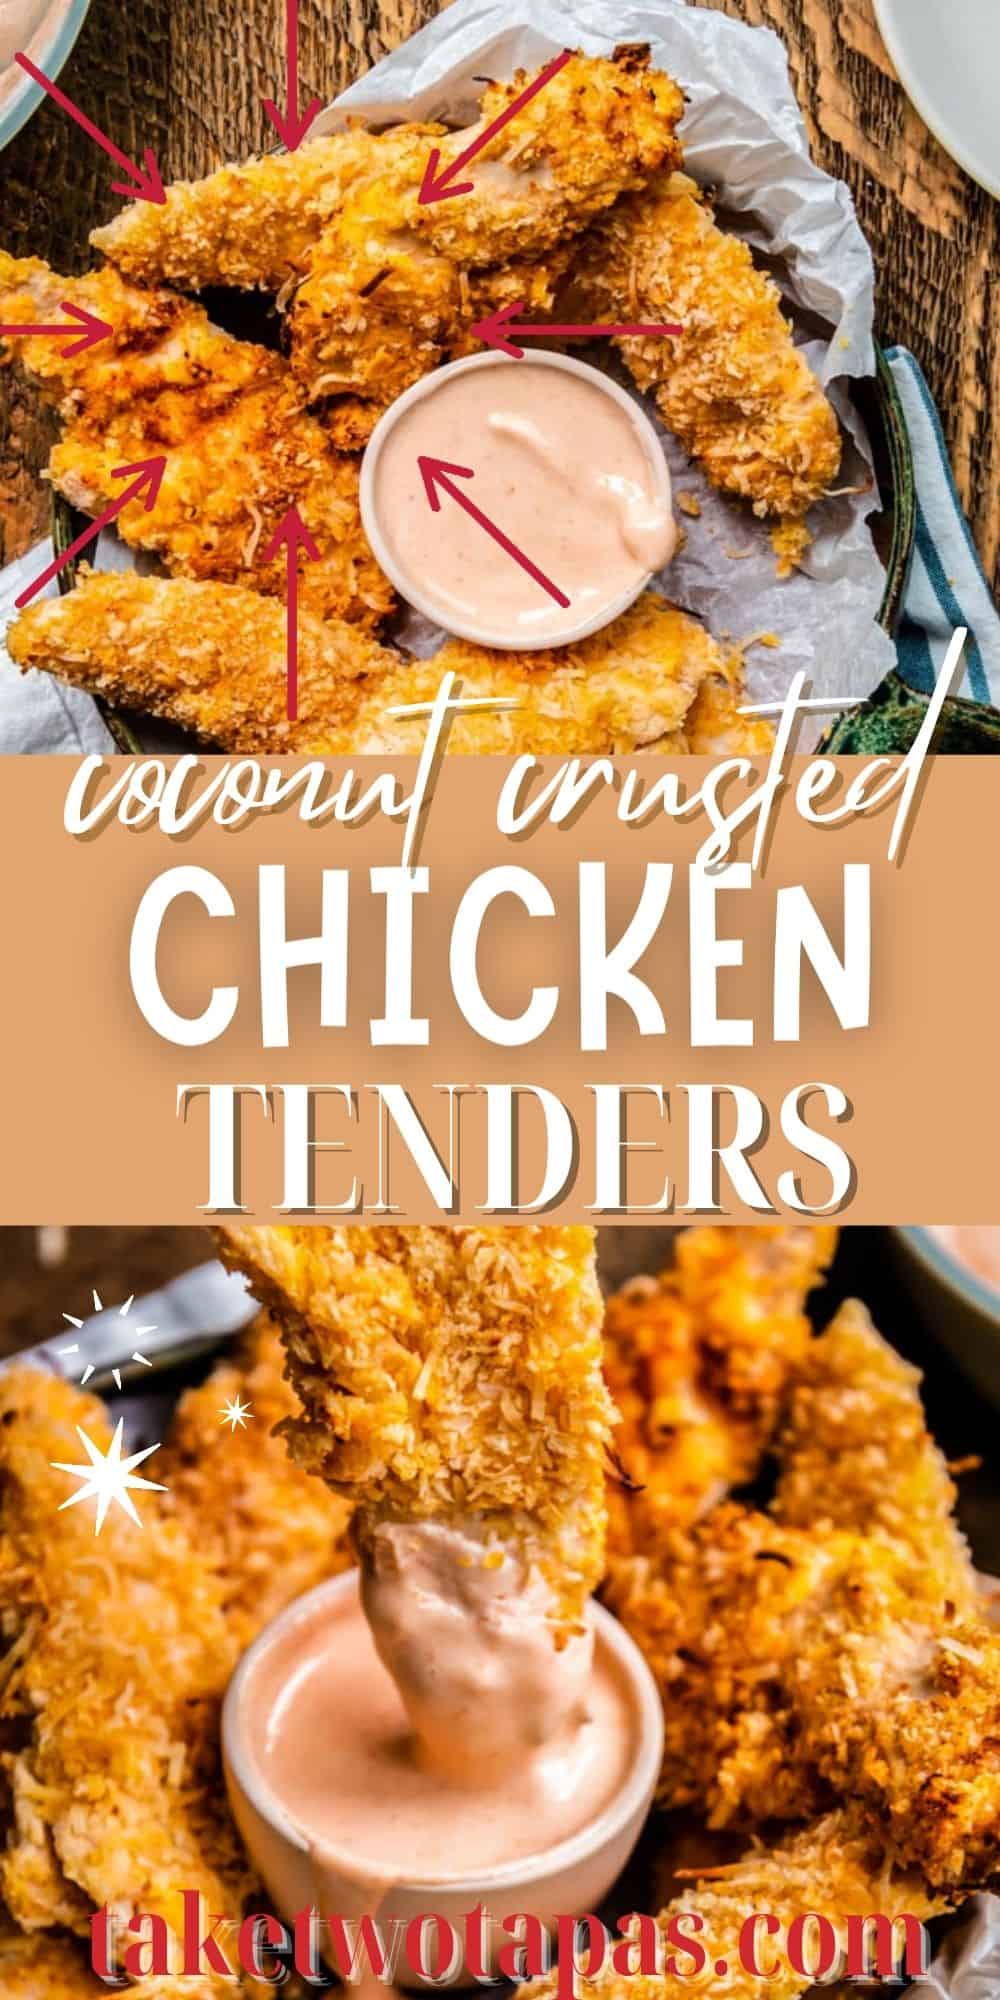 collage of chicken with text "coconut crusted chicken tenders"